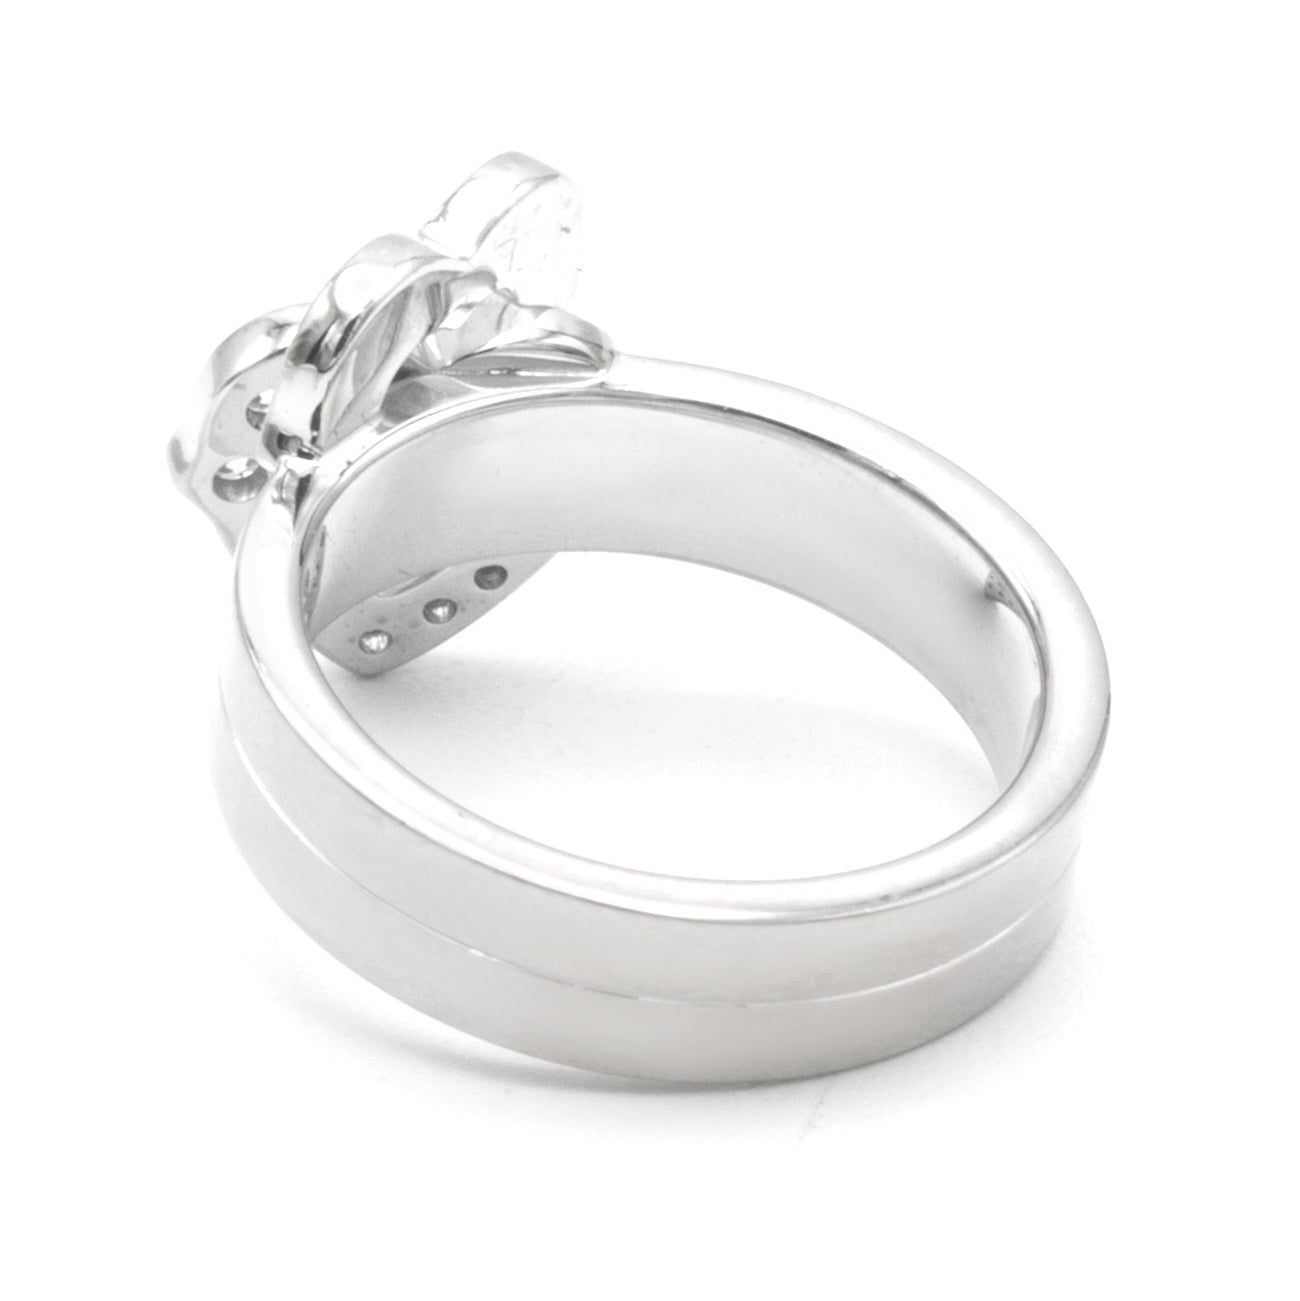 Cartier Double Heart ring